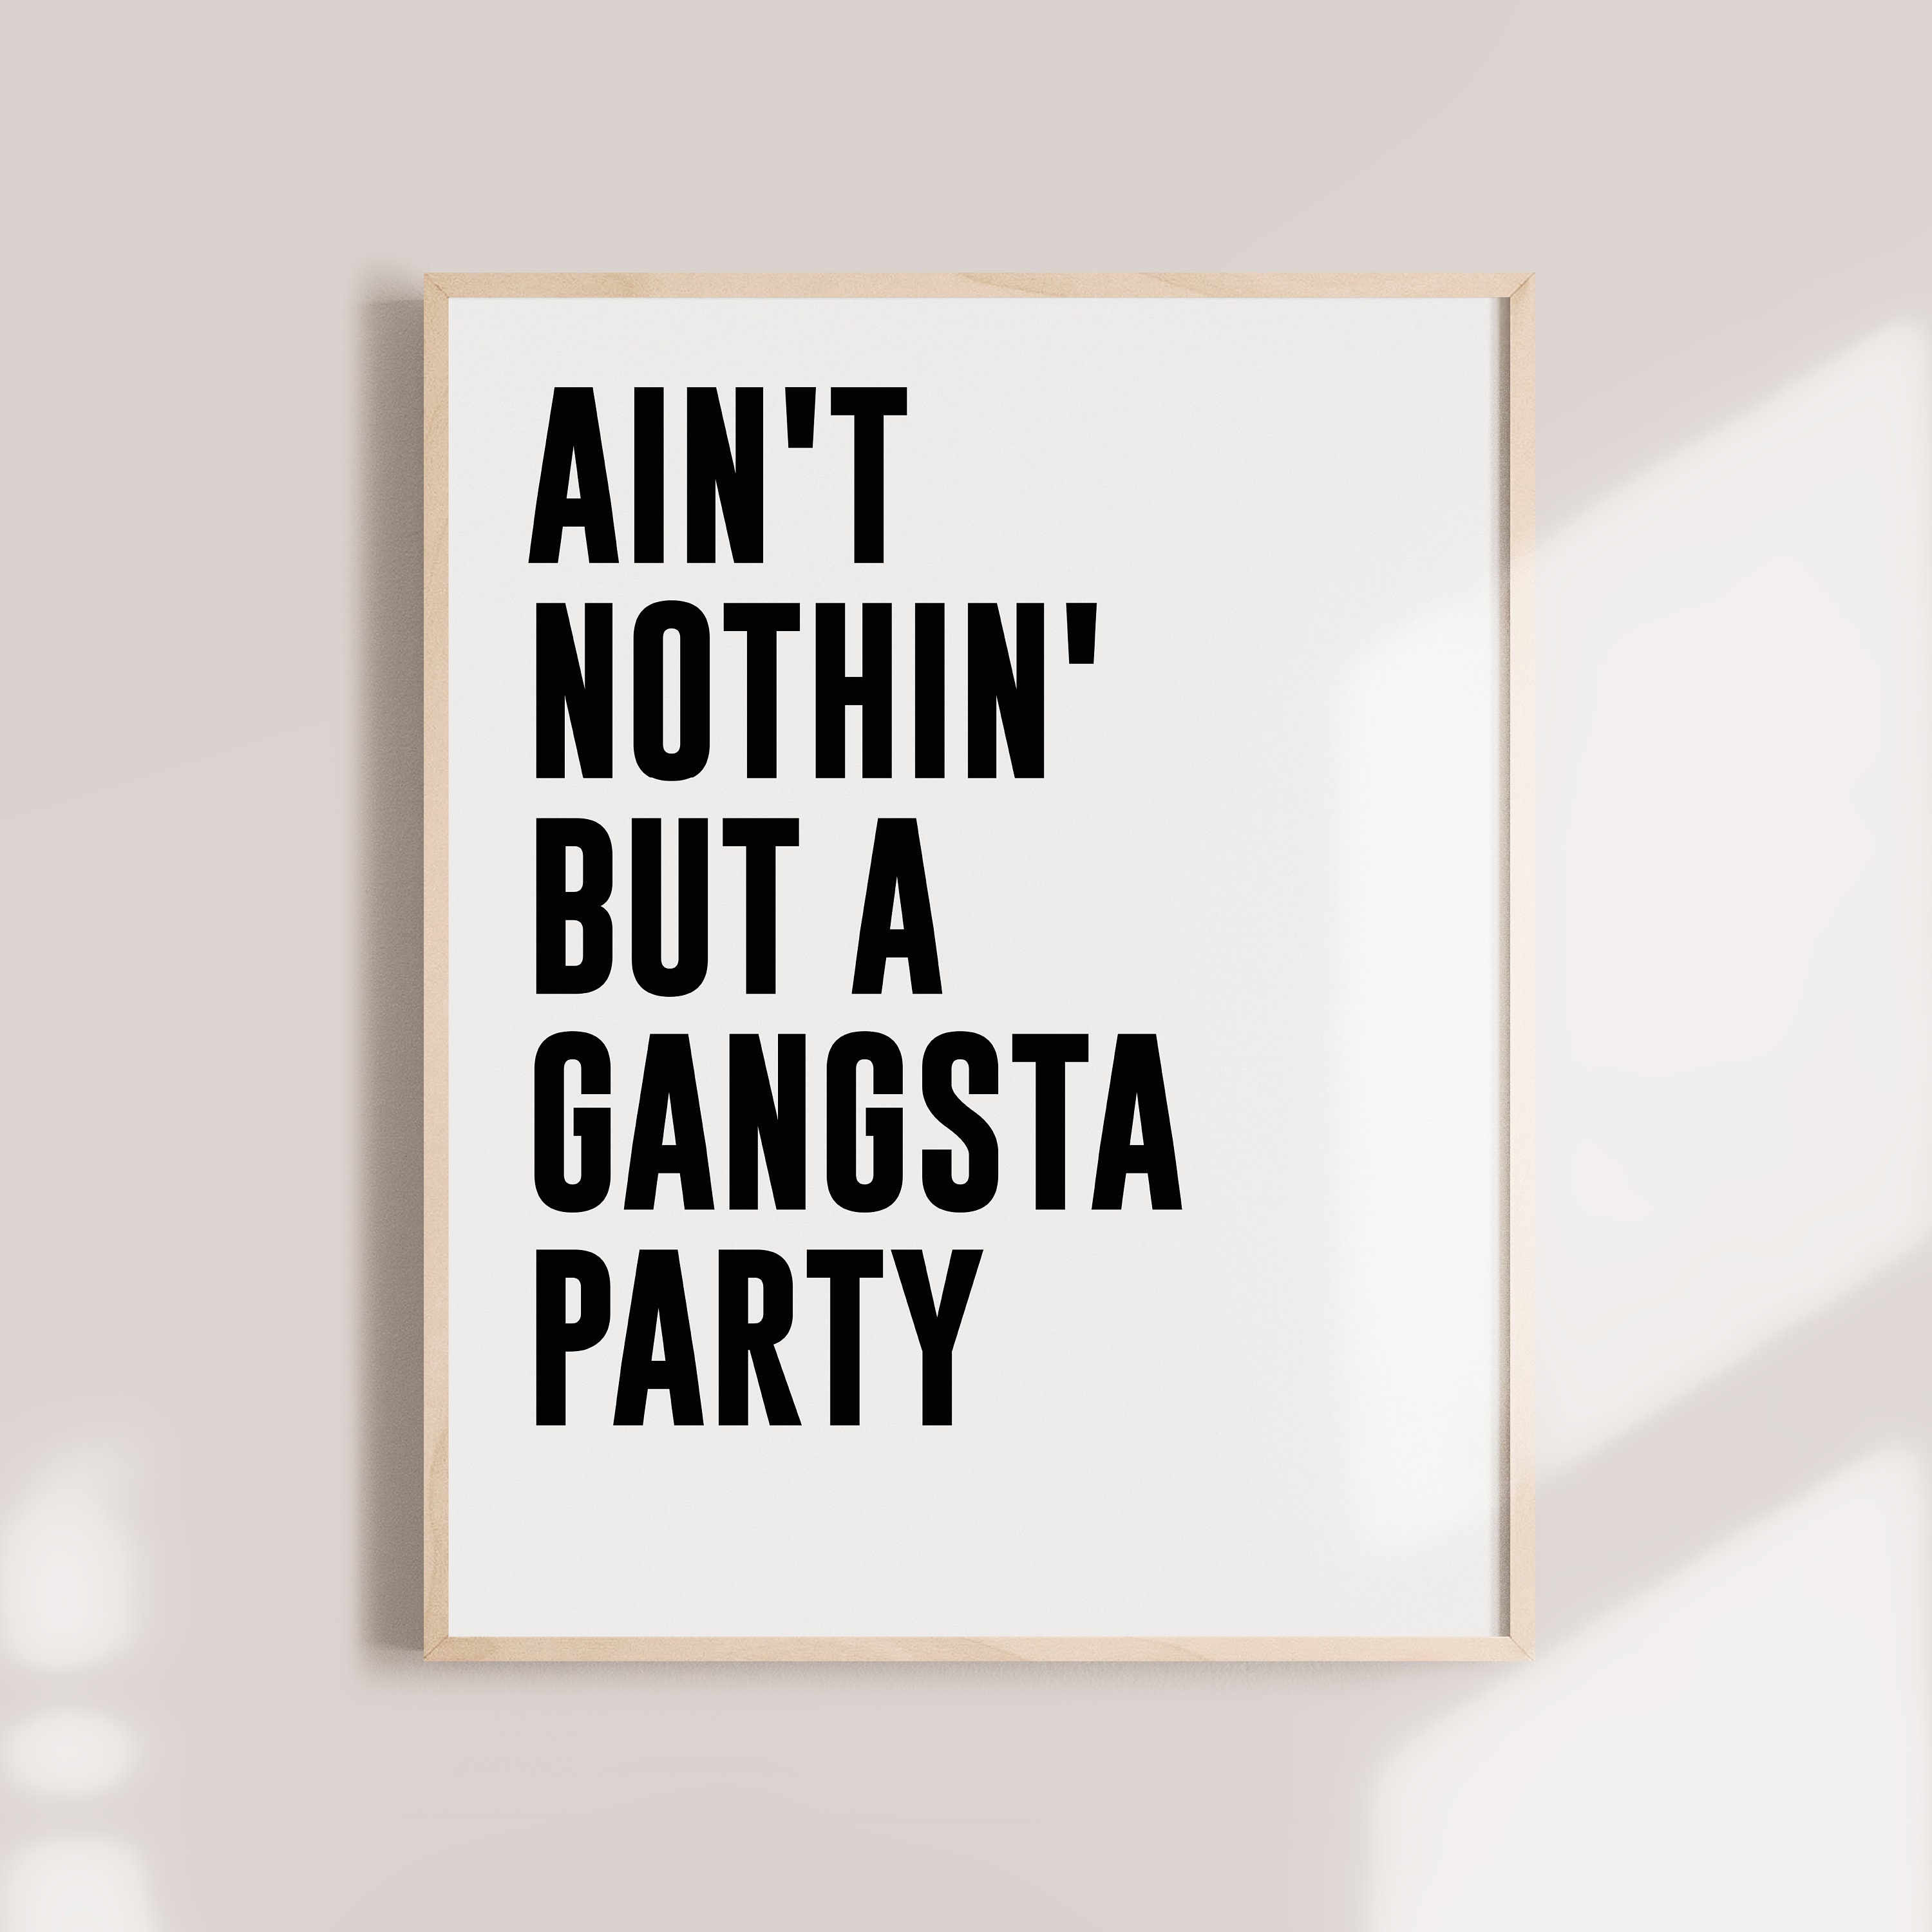 Nothing but a Gangsta Party Tupac 2pac Lyrics Quote Hip - Etsy